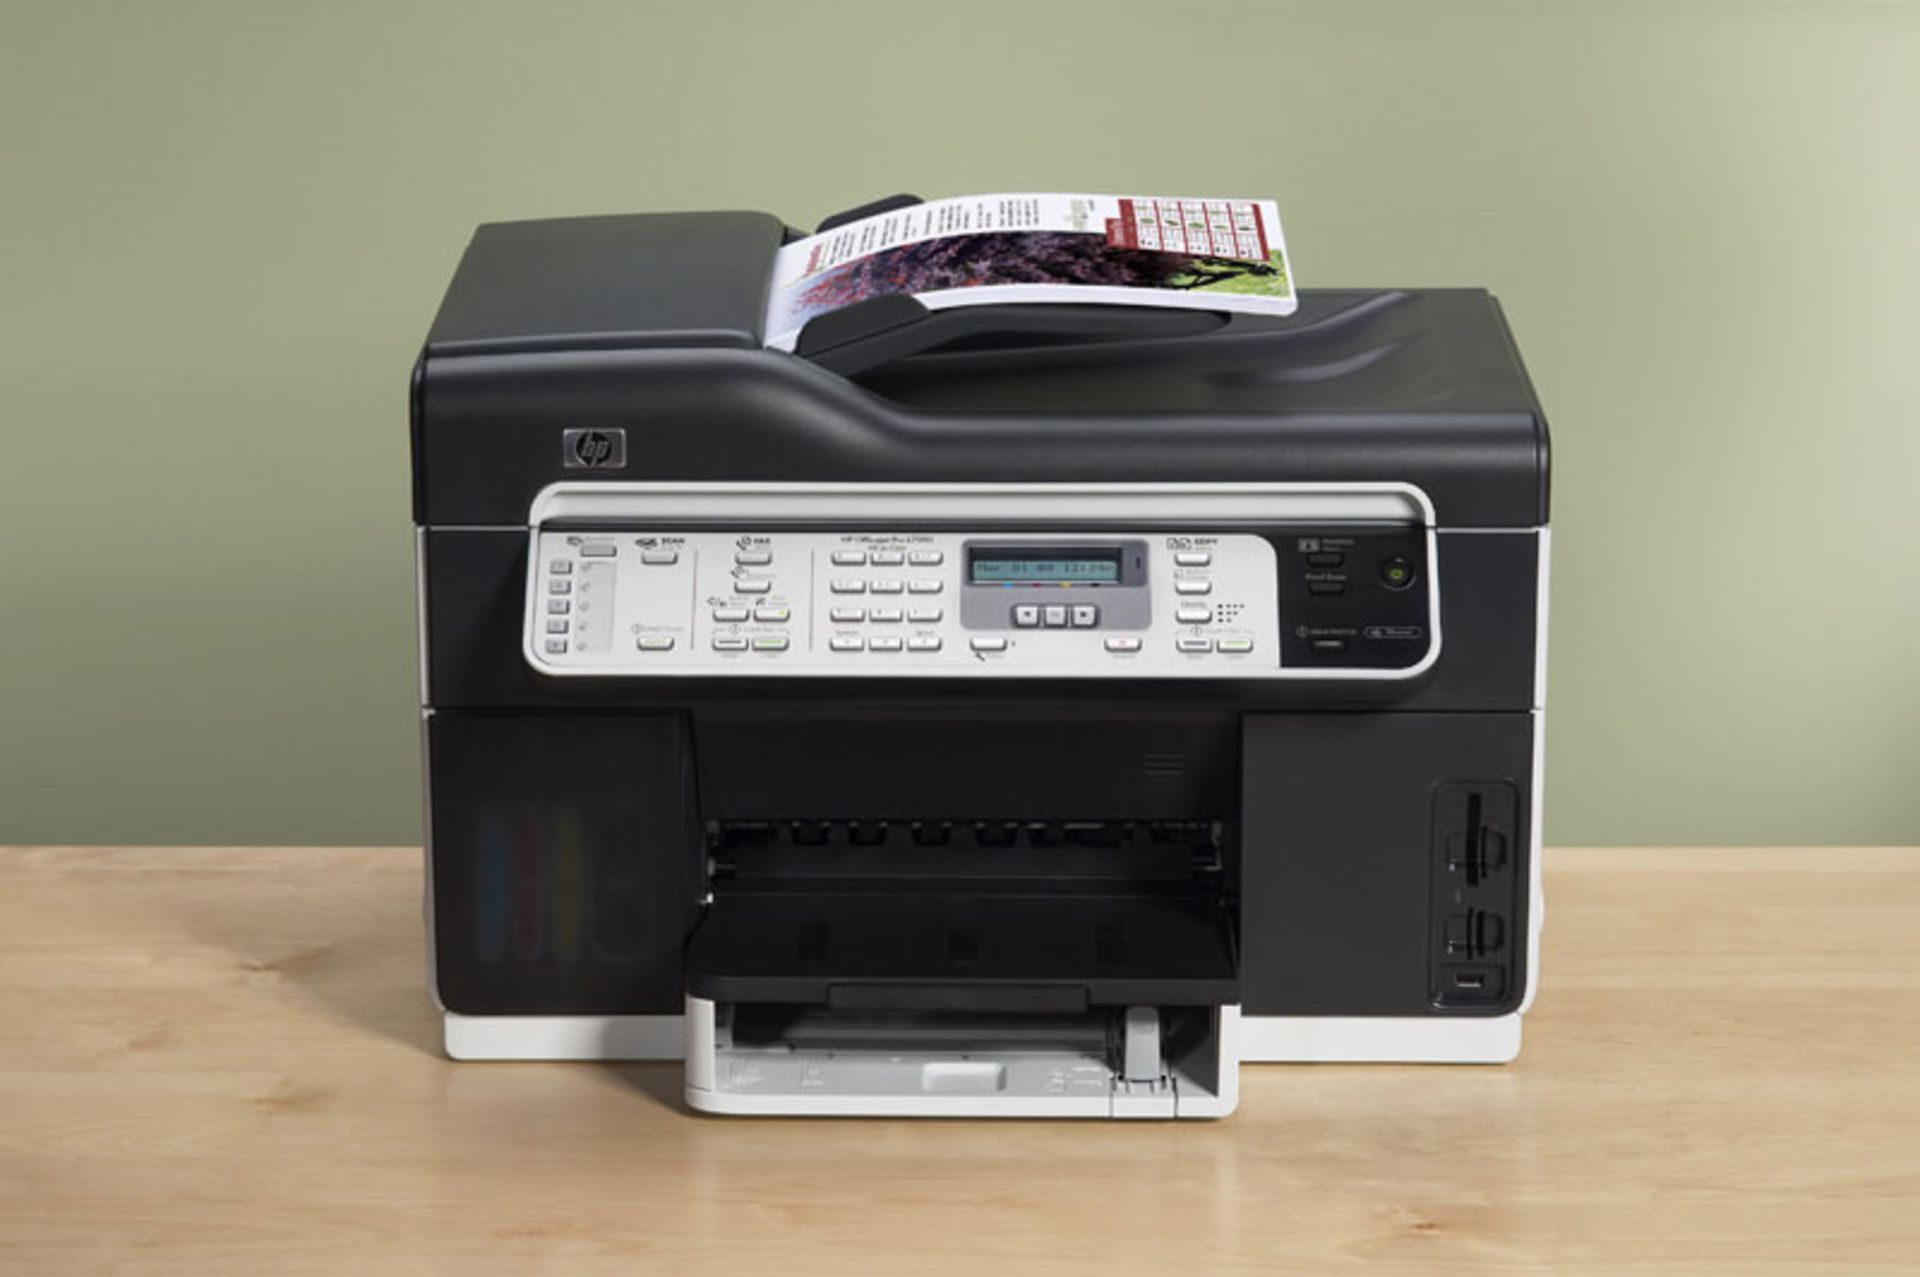 HP Officejet Pro L7590 All-in-One - Multifunction fax copier printer up to 35ppm